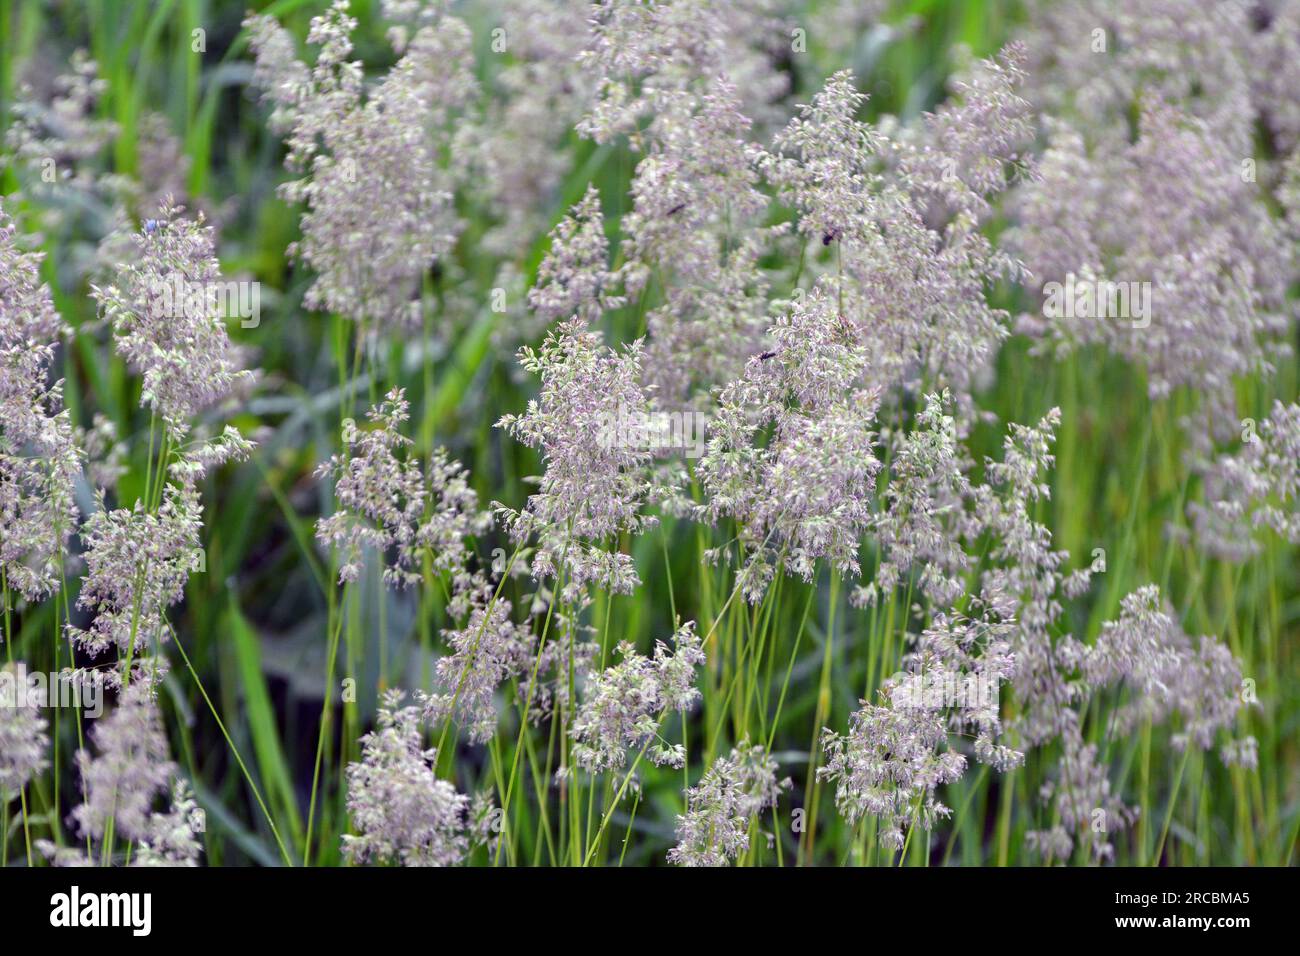 In the meadow among wild grasses in the pasture grows Poa. Stock Photo